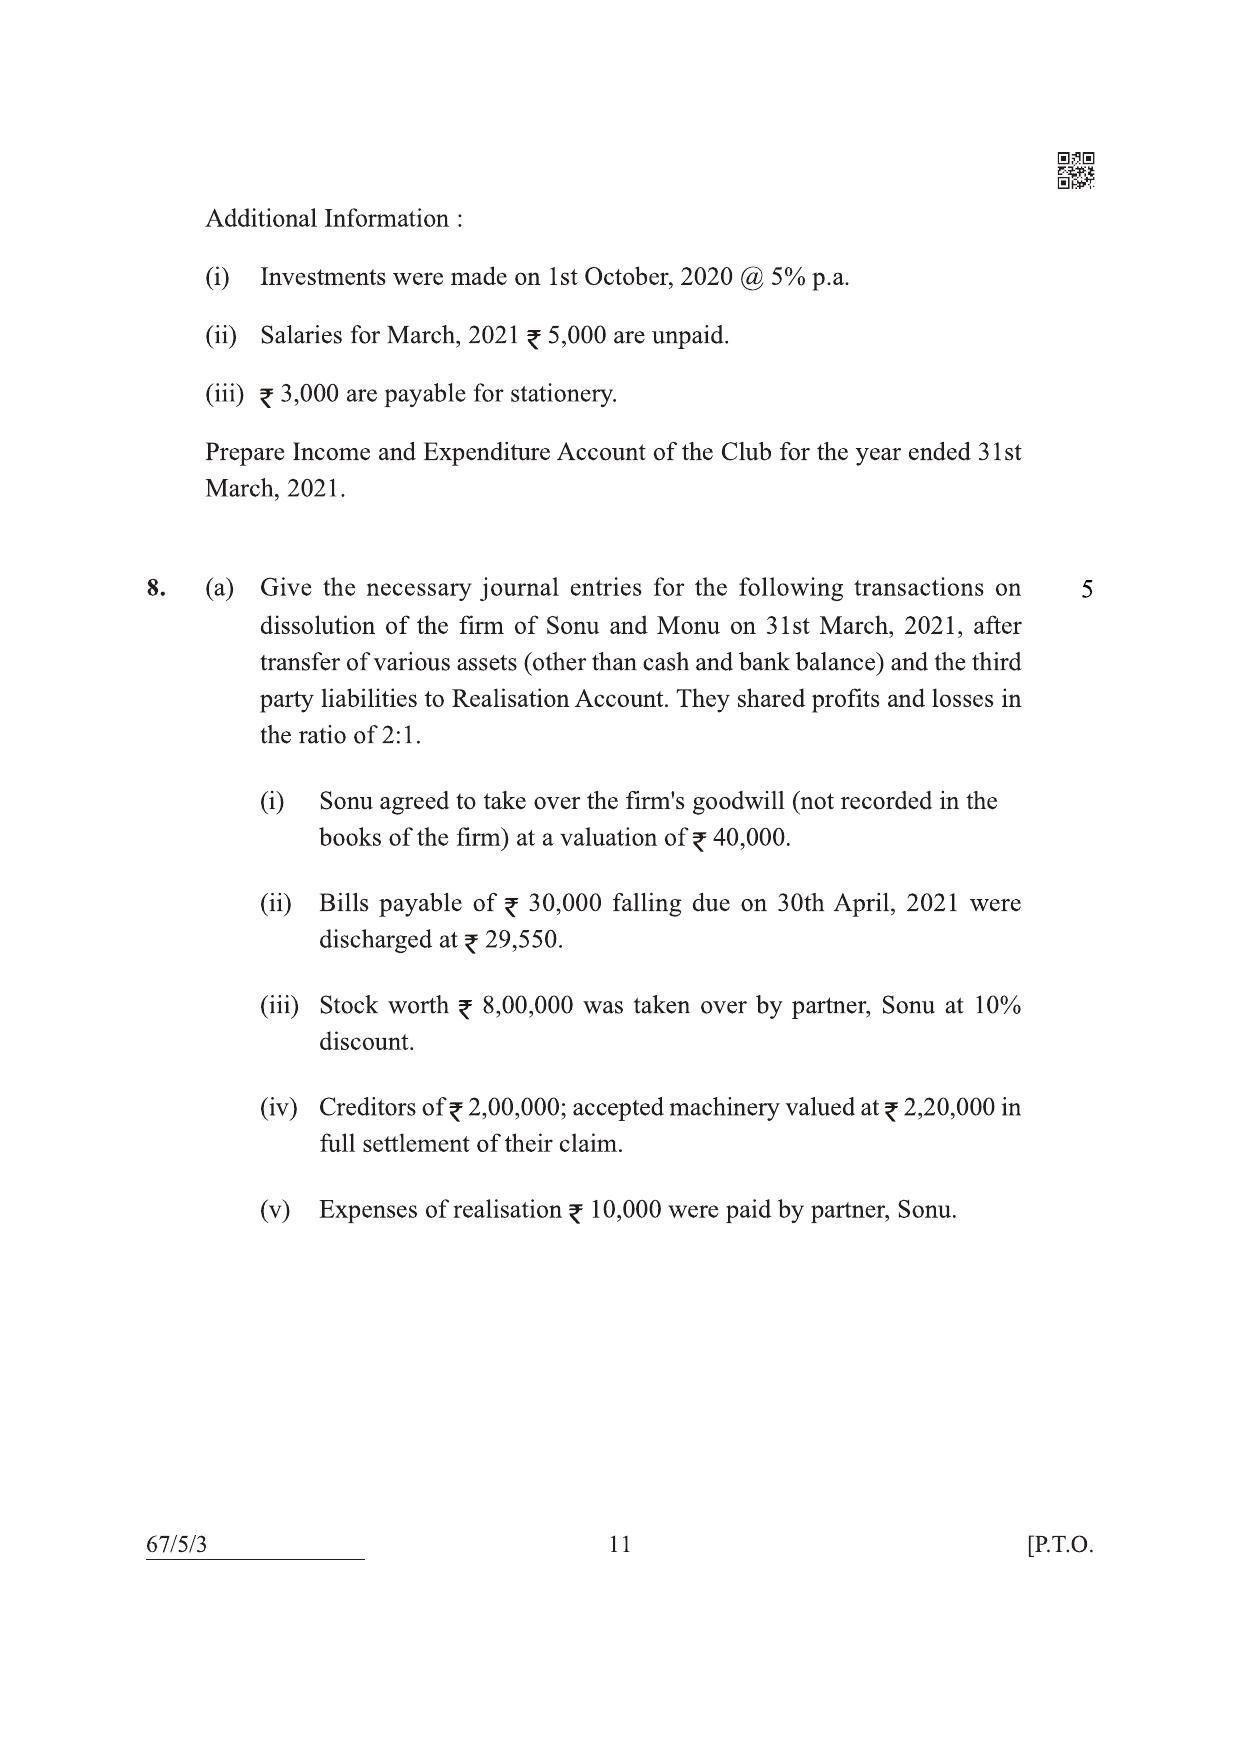 CBSE Class 12 67-5-3 Accountancy 2022 Question Paper - Page 11